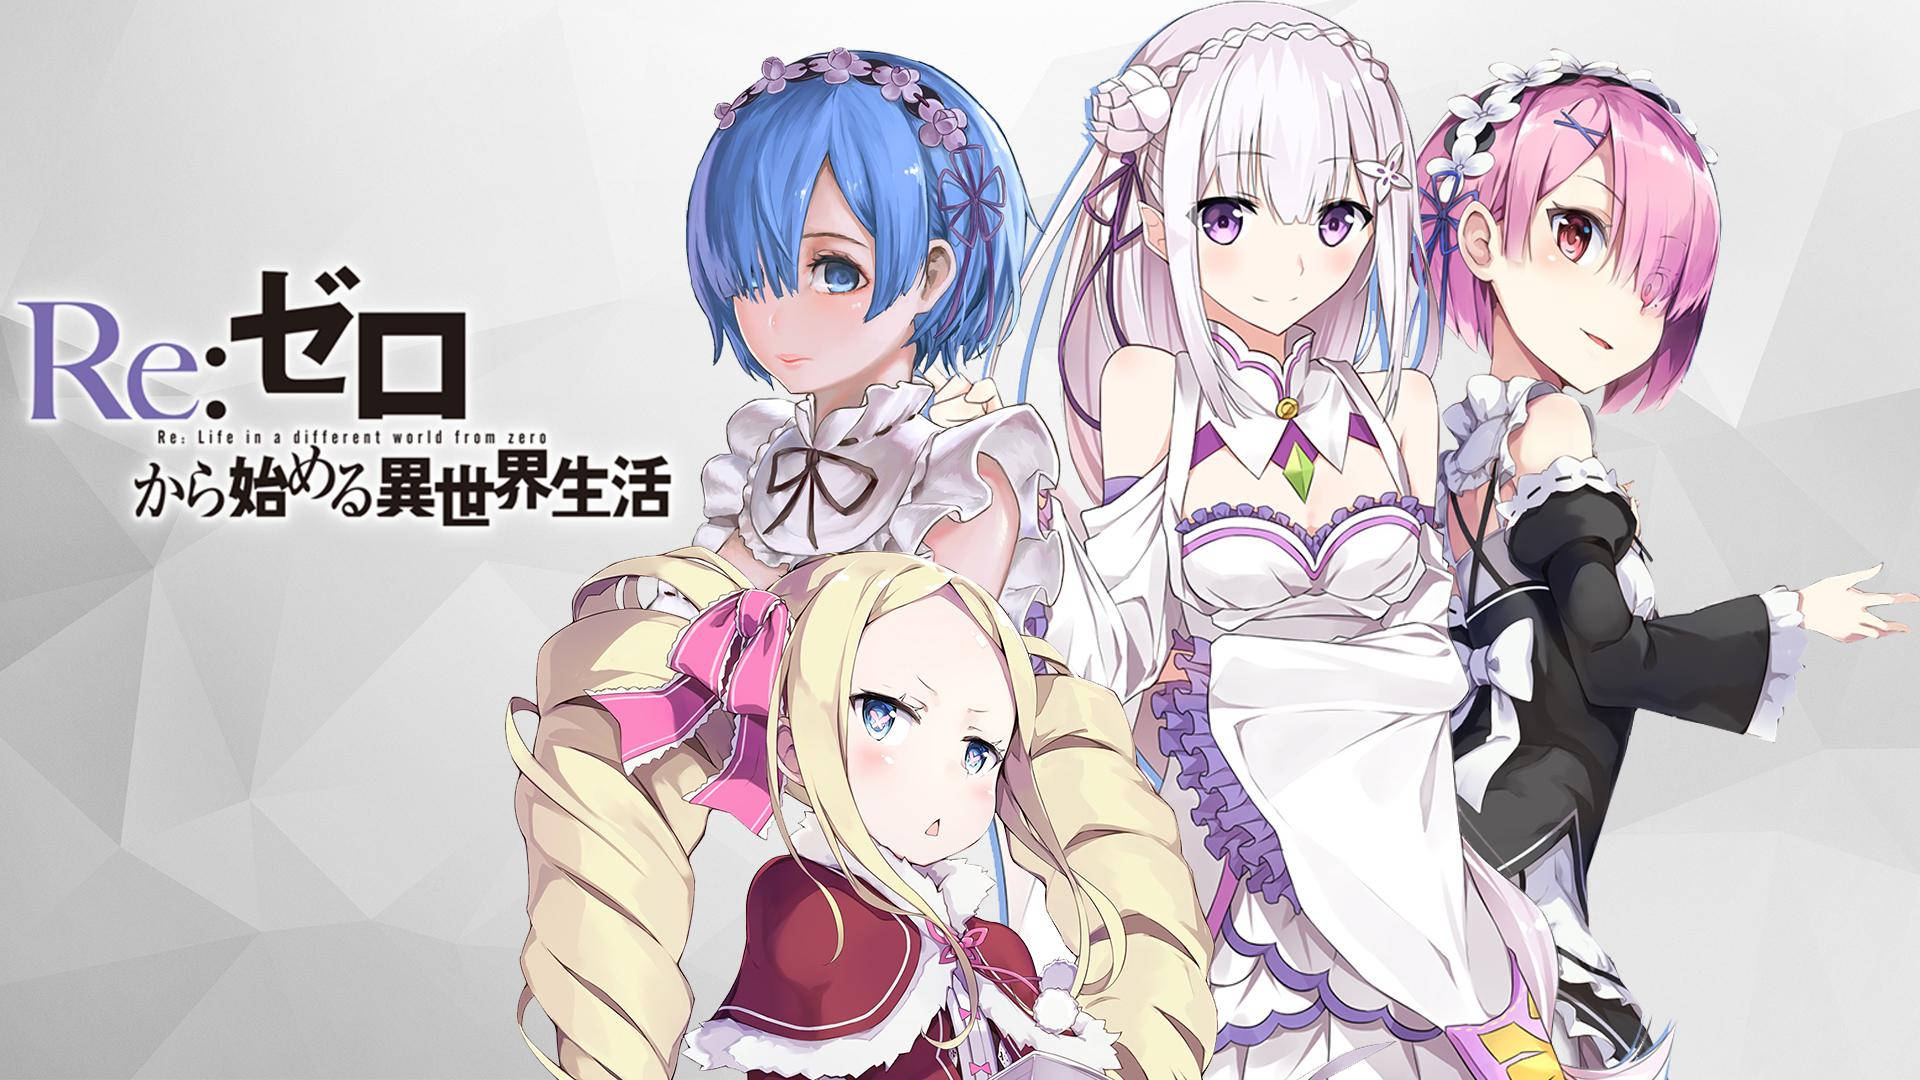 "An Afternoon of Adventure with Emilia and Rem from Re:Zero!" Wallpaper